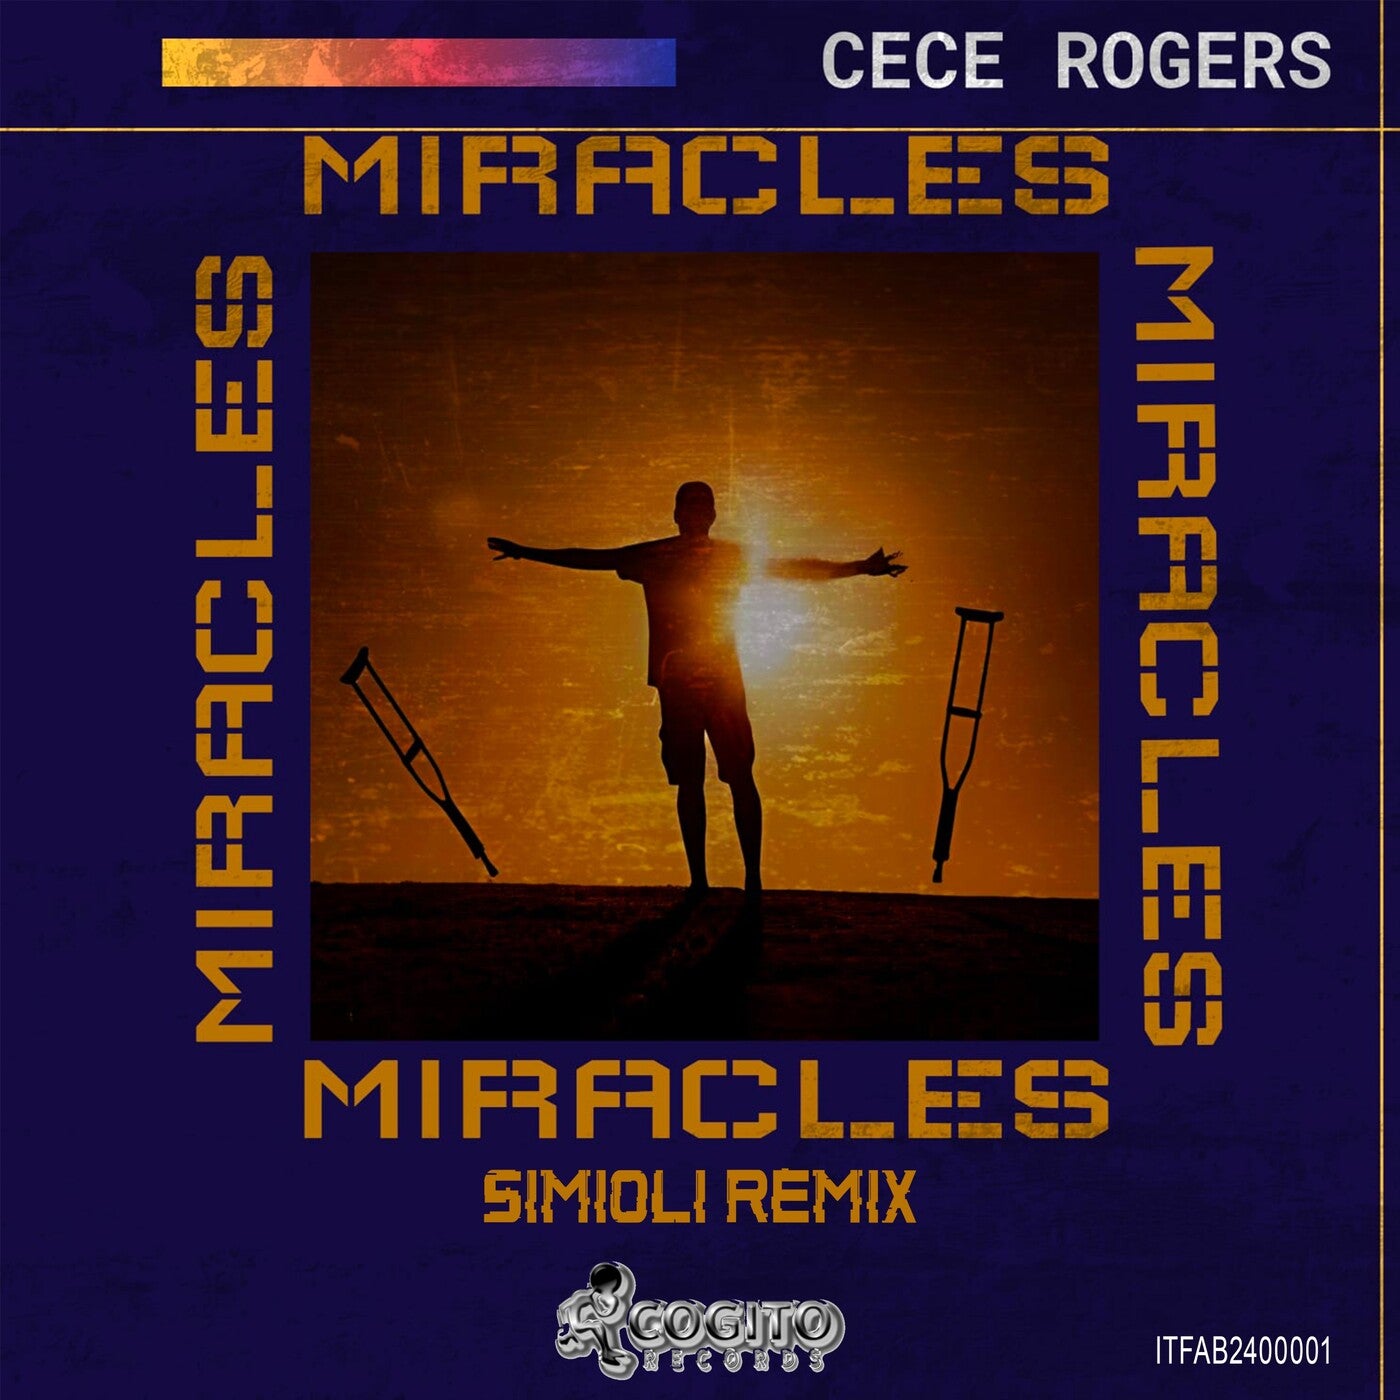 Cover - CeCe Rogers - Miracles (Simioli Remix)